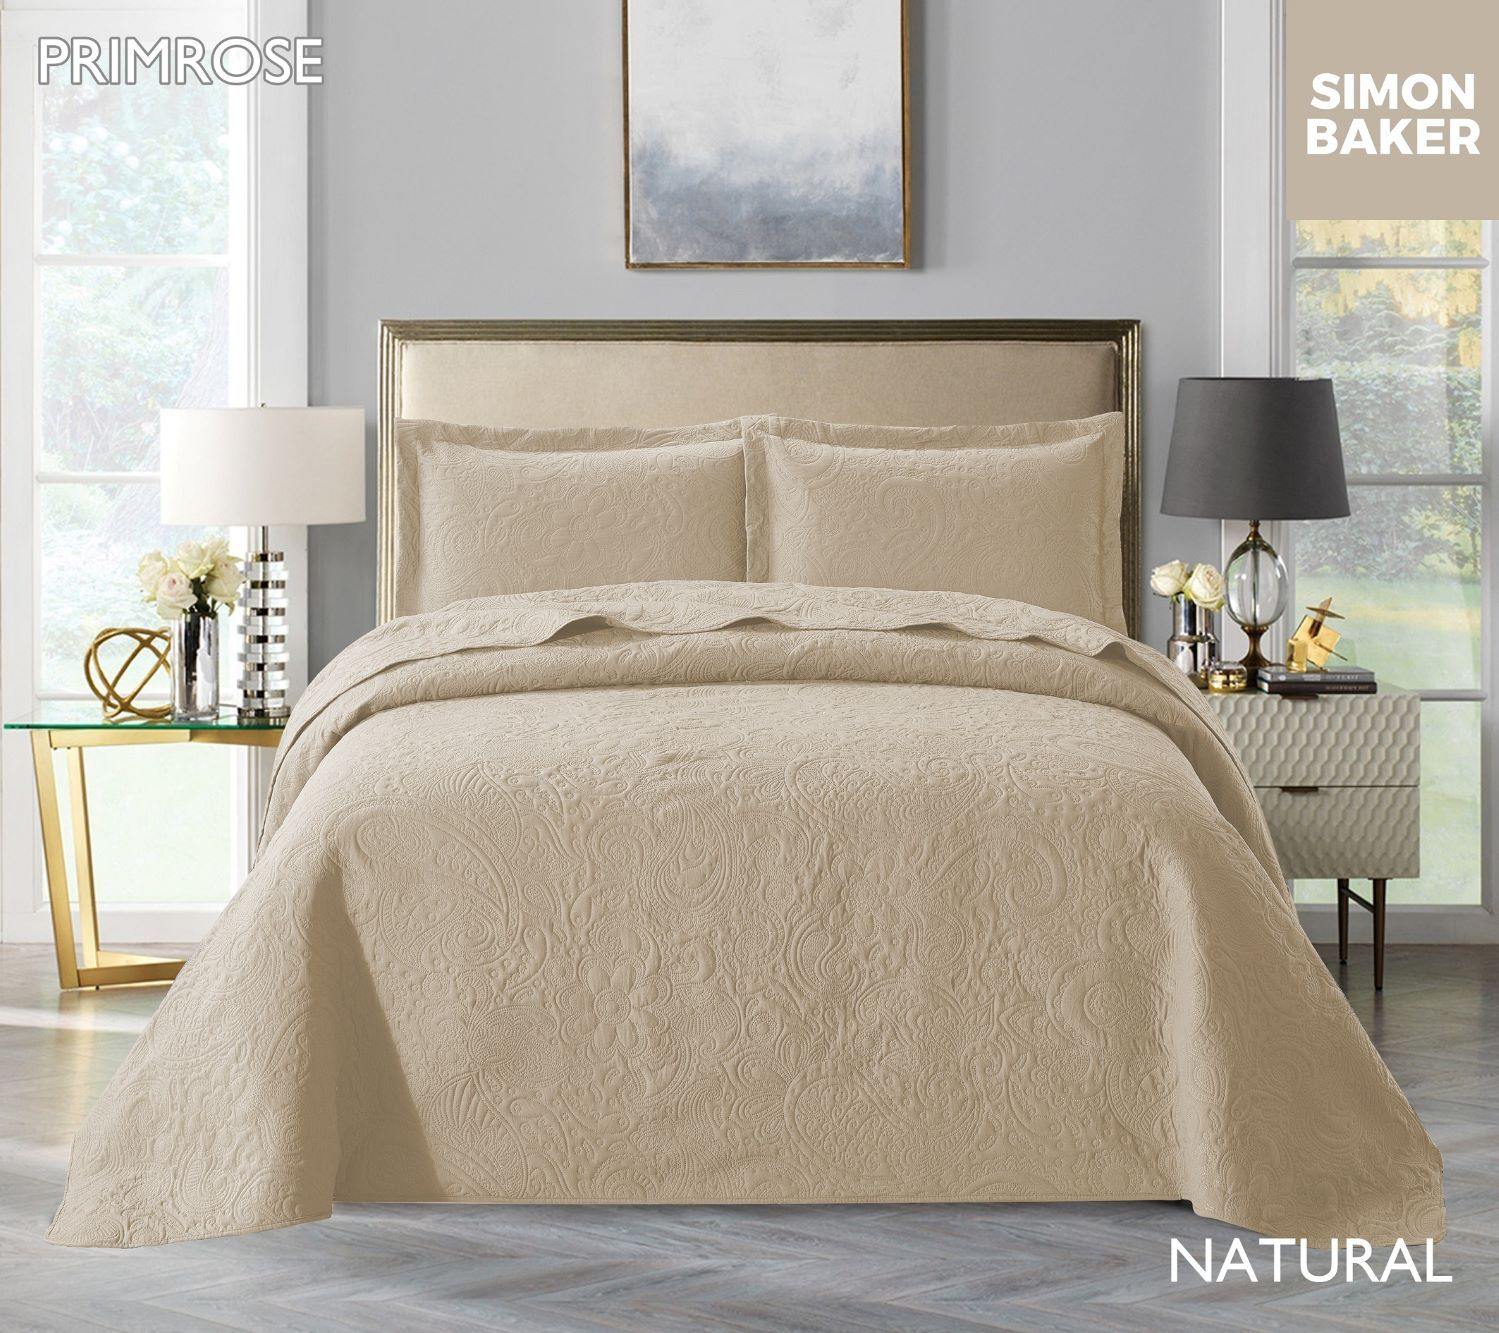 Simon Baker | Primrose Quilted Bedspread Natural (Various Sizes)